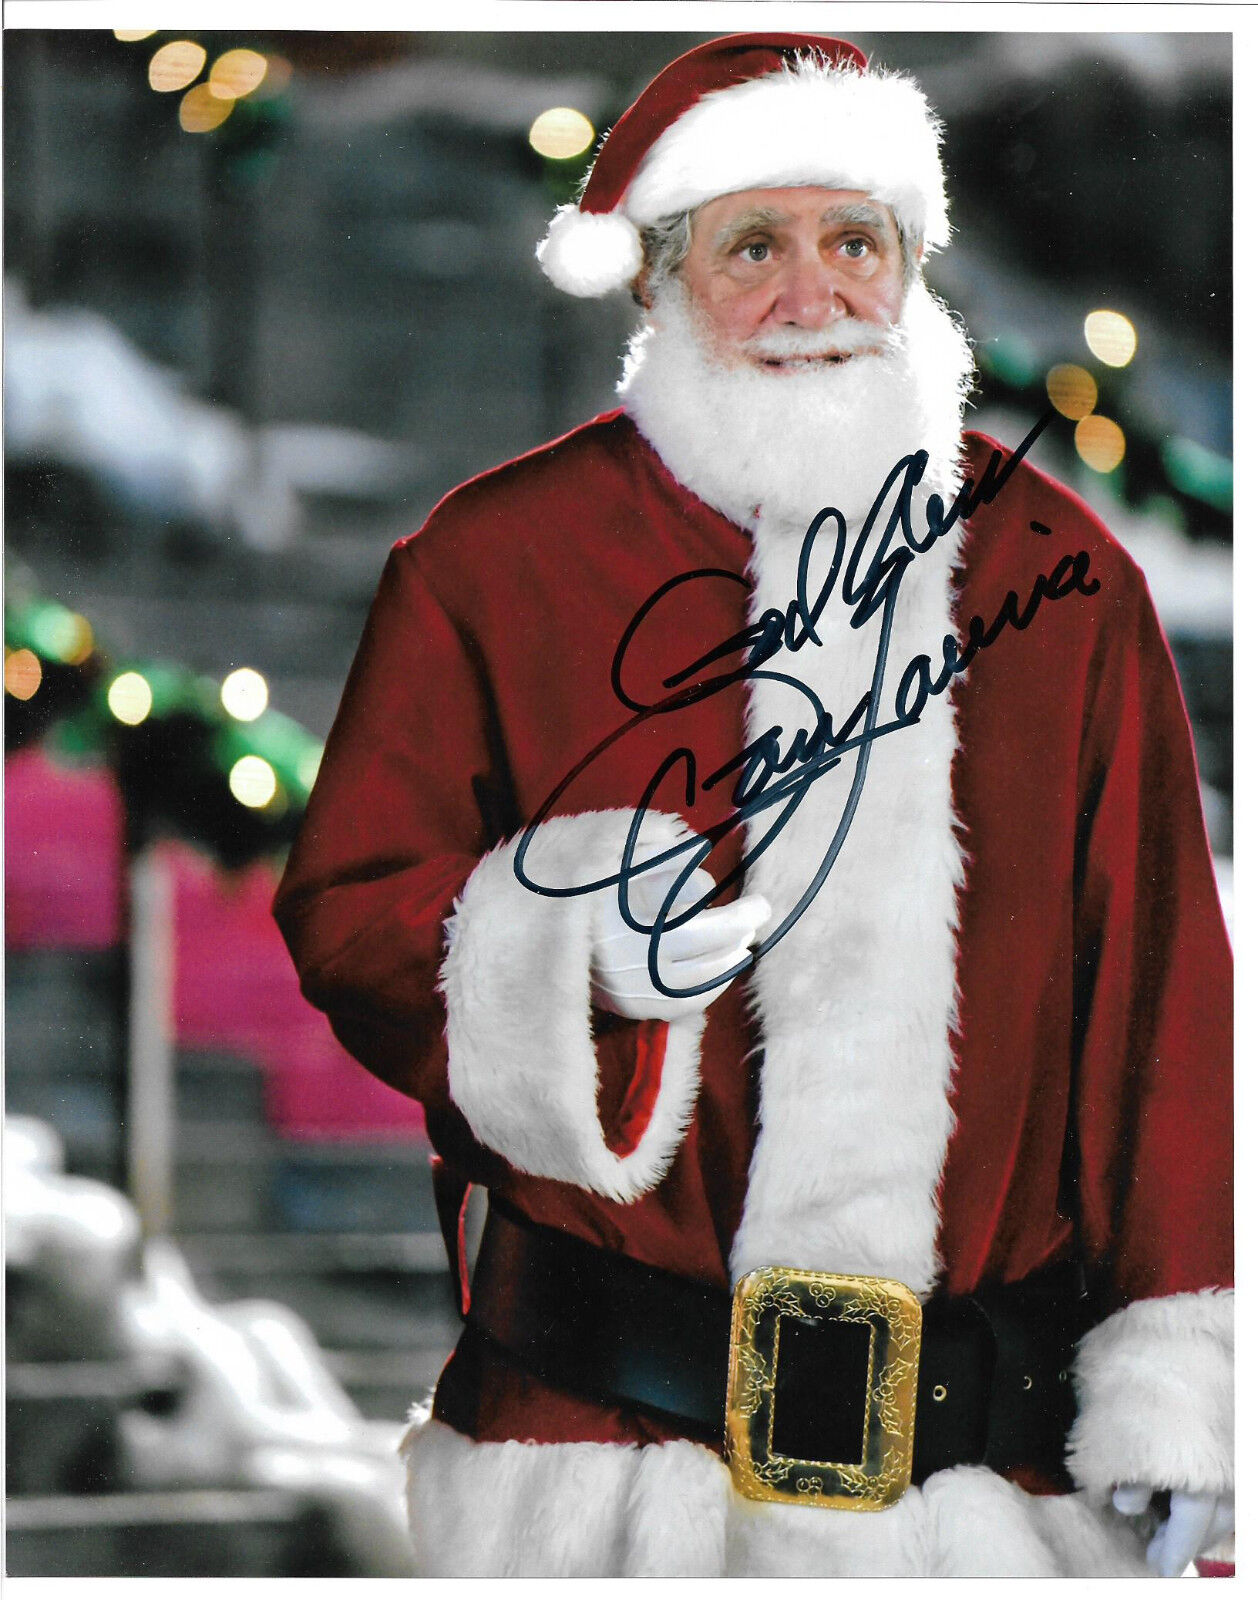 Dan Lauria Signed 8x10 Photo Poster painting Autographed, I'm Not Ready for Christmas, Santa